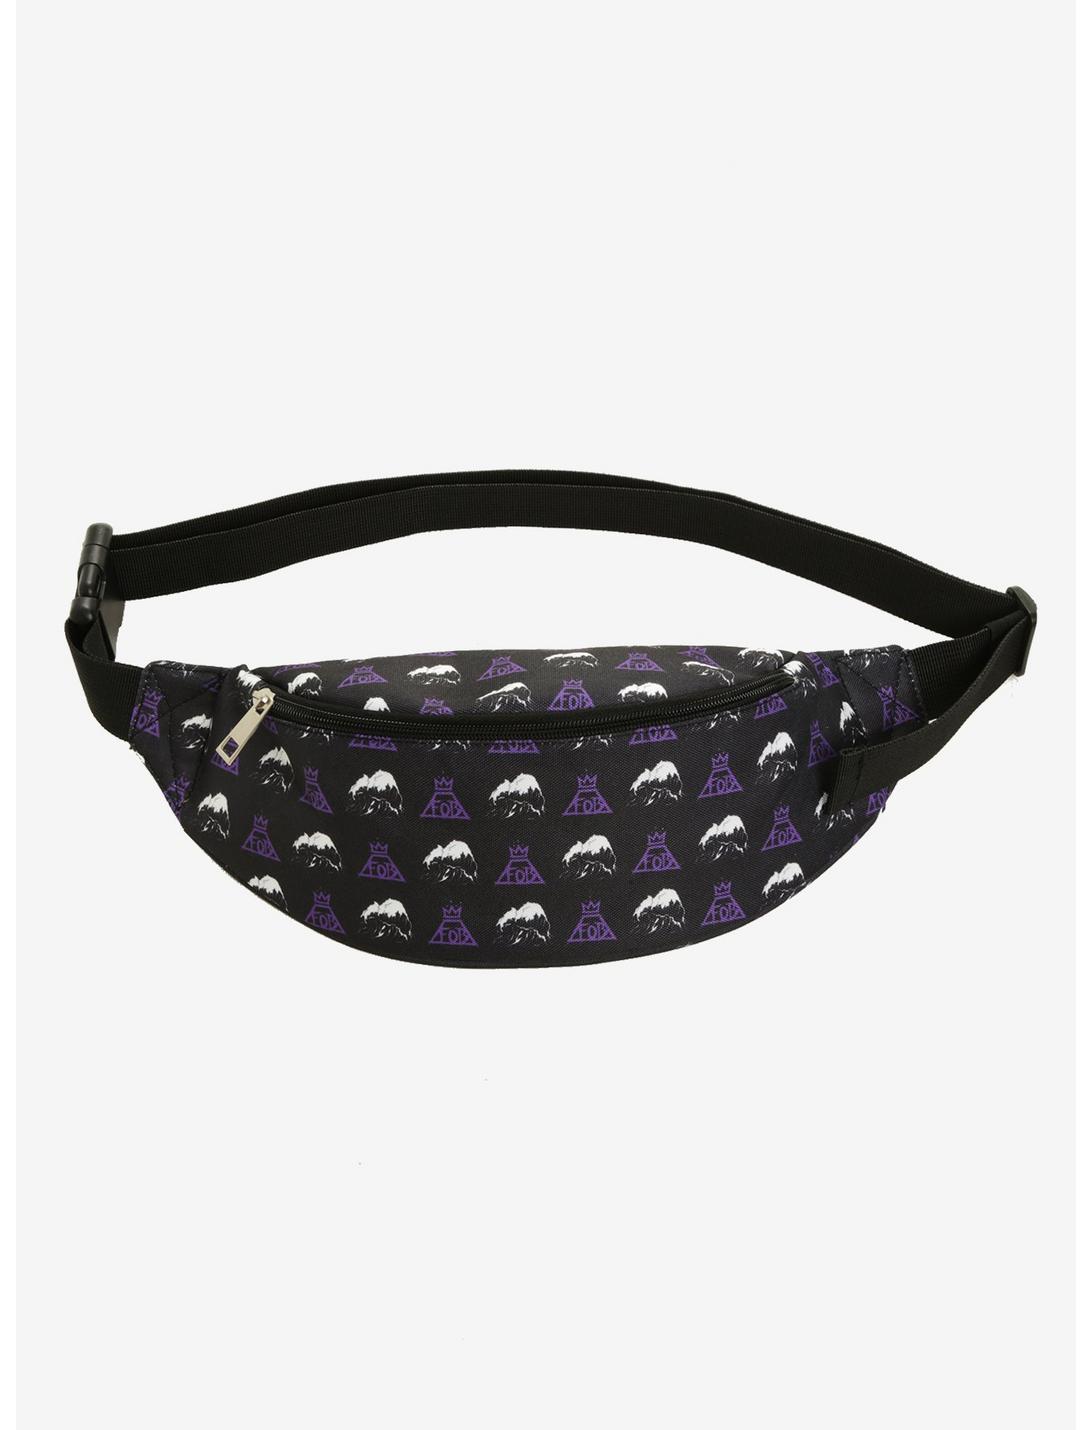 Fall Out Boy Mania Fanny Pack | Hot Topic